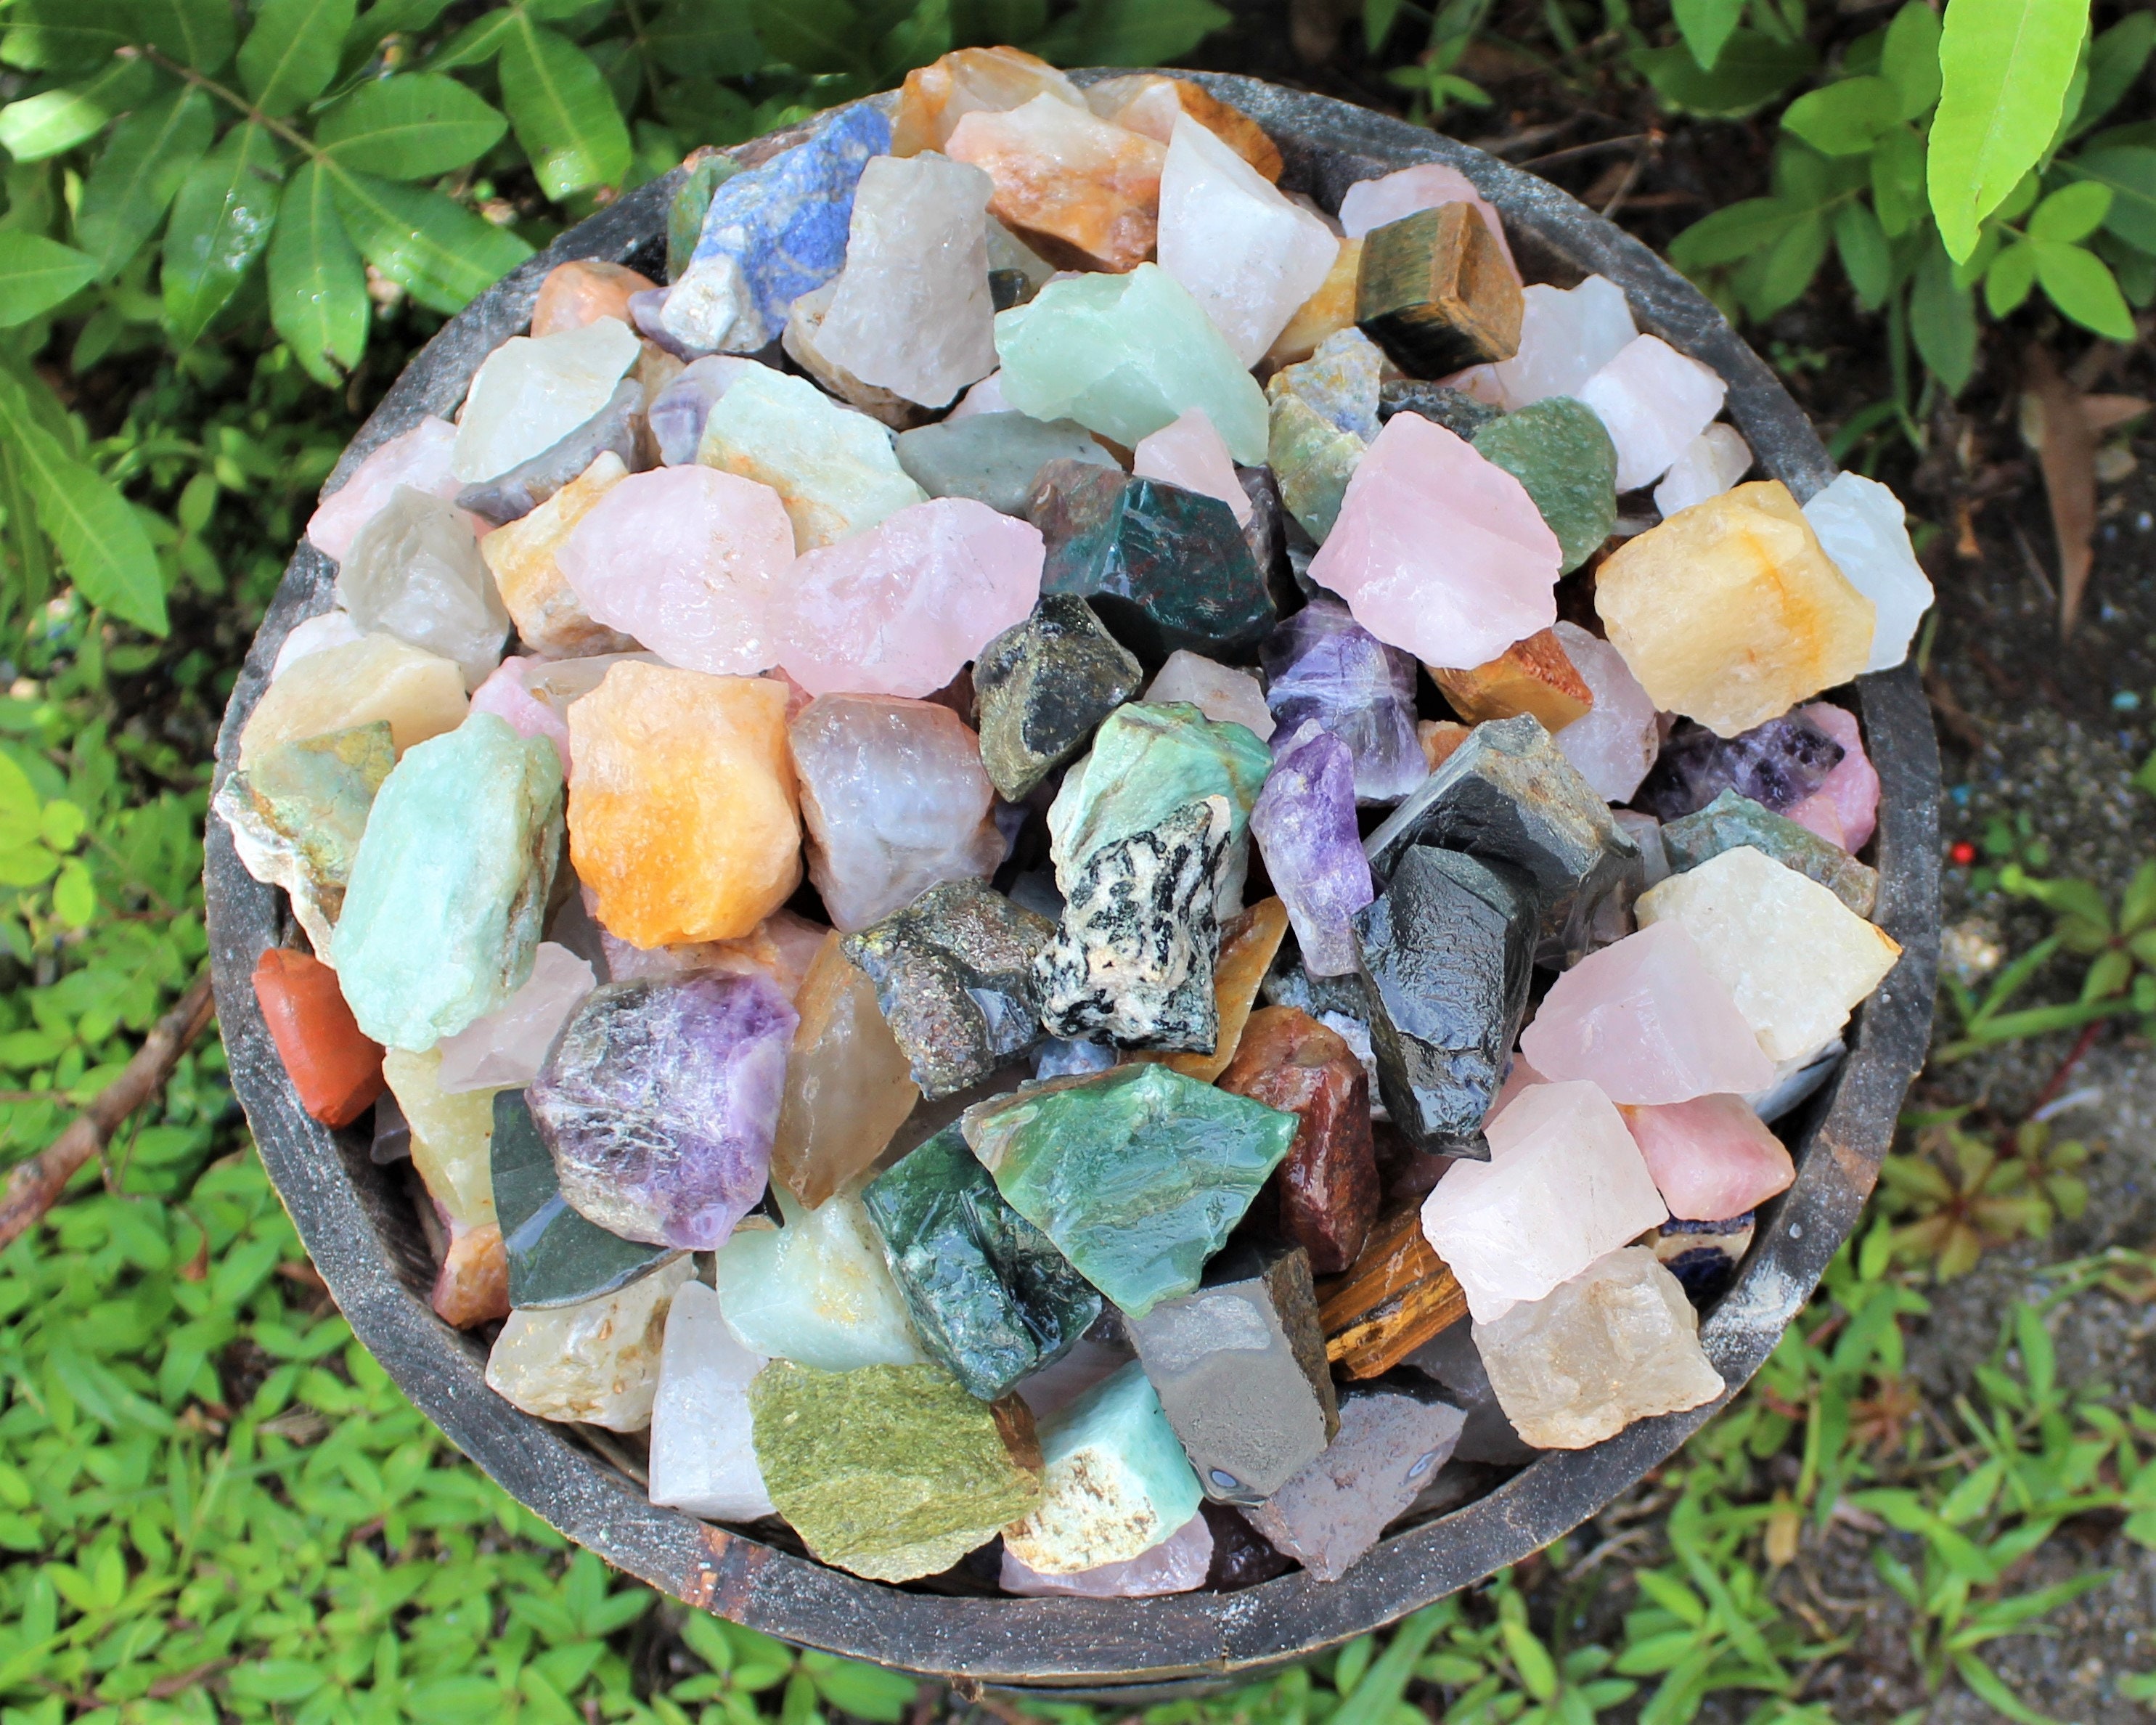 1LB Bulk Rough Stone Mix - 9 Types of Natural Raw Crystals & Rocks for  Tumbling, Cabbing, Polishing, Wire Wrapping